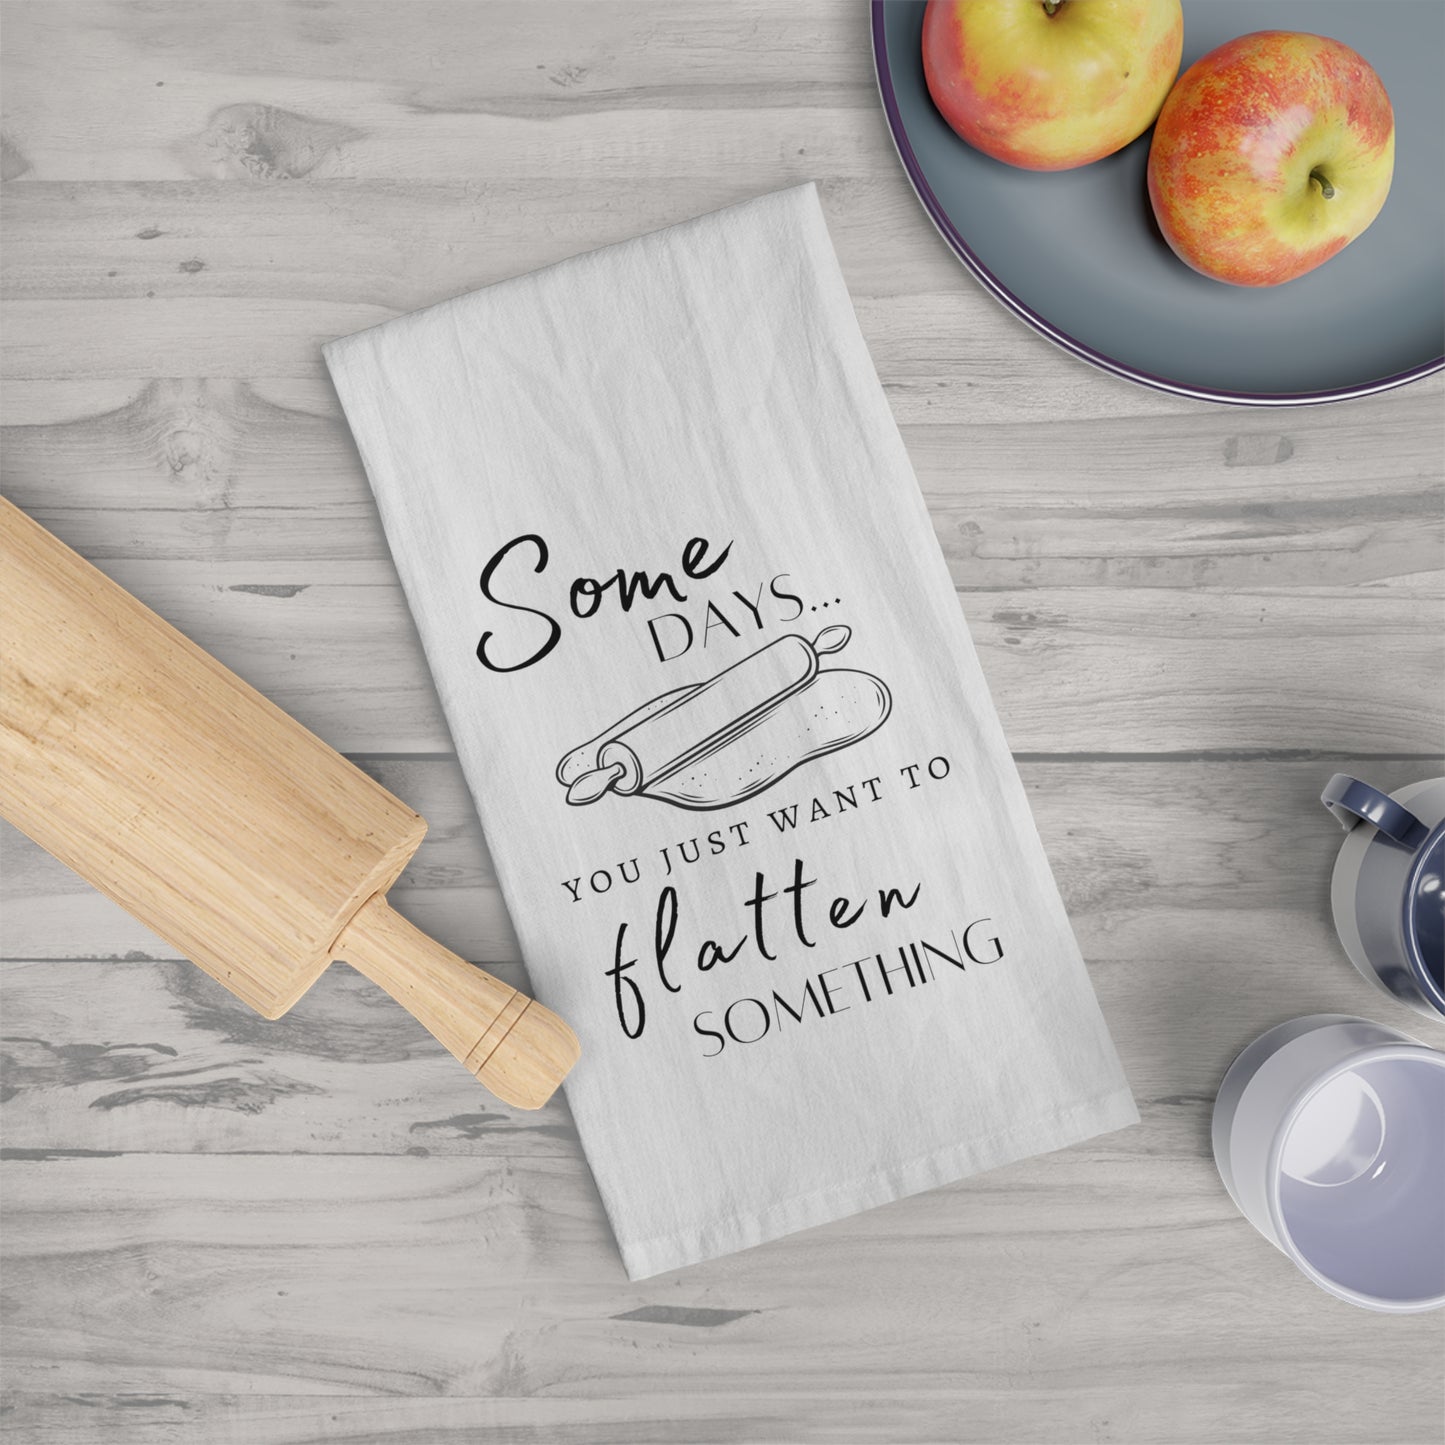 100% Cotton Tea Towel ∣ 28"x28" ∣ Funny Rolling Pin Design ∣ Add Comedy to Your Kitchen!